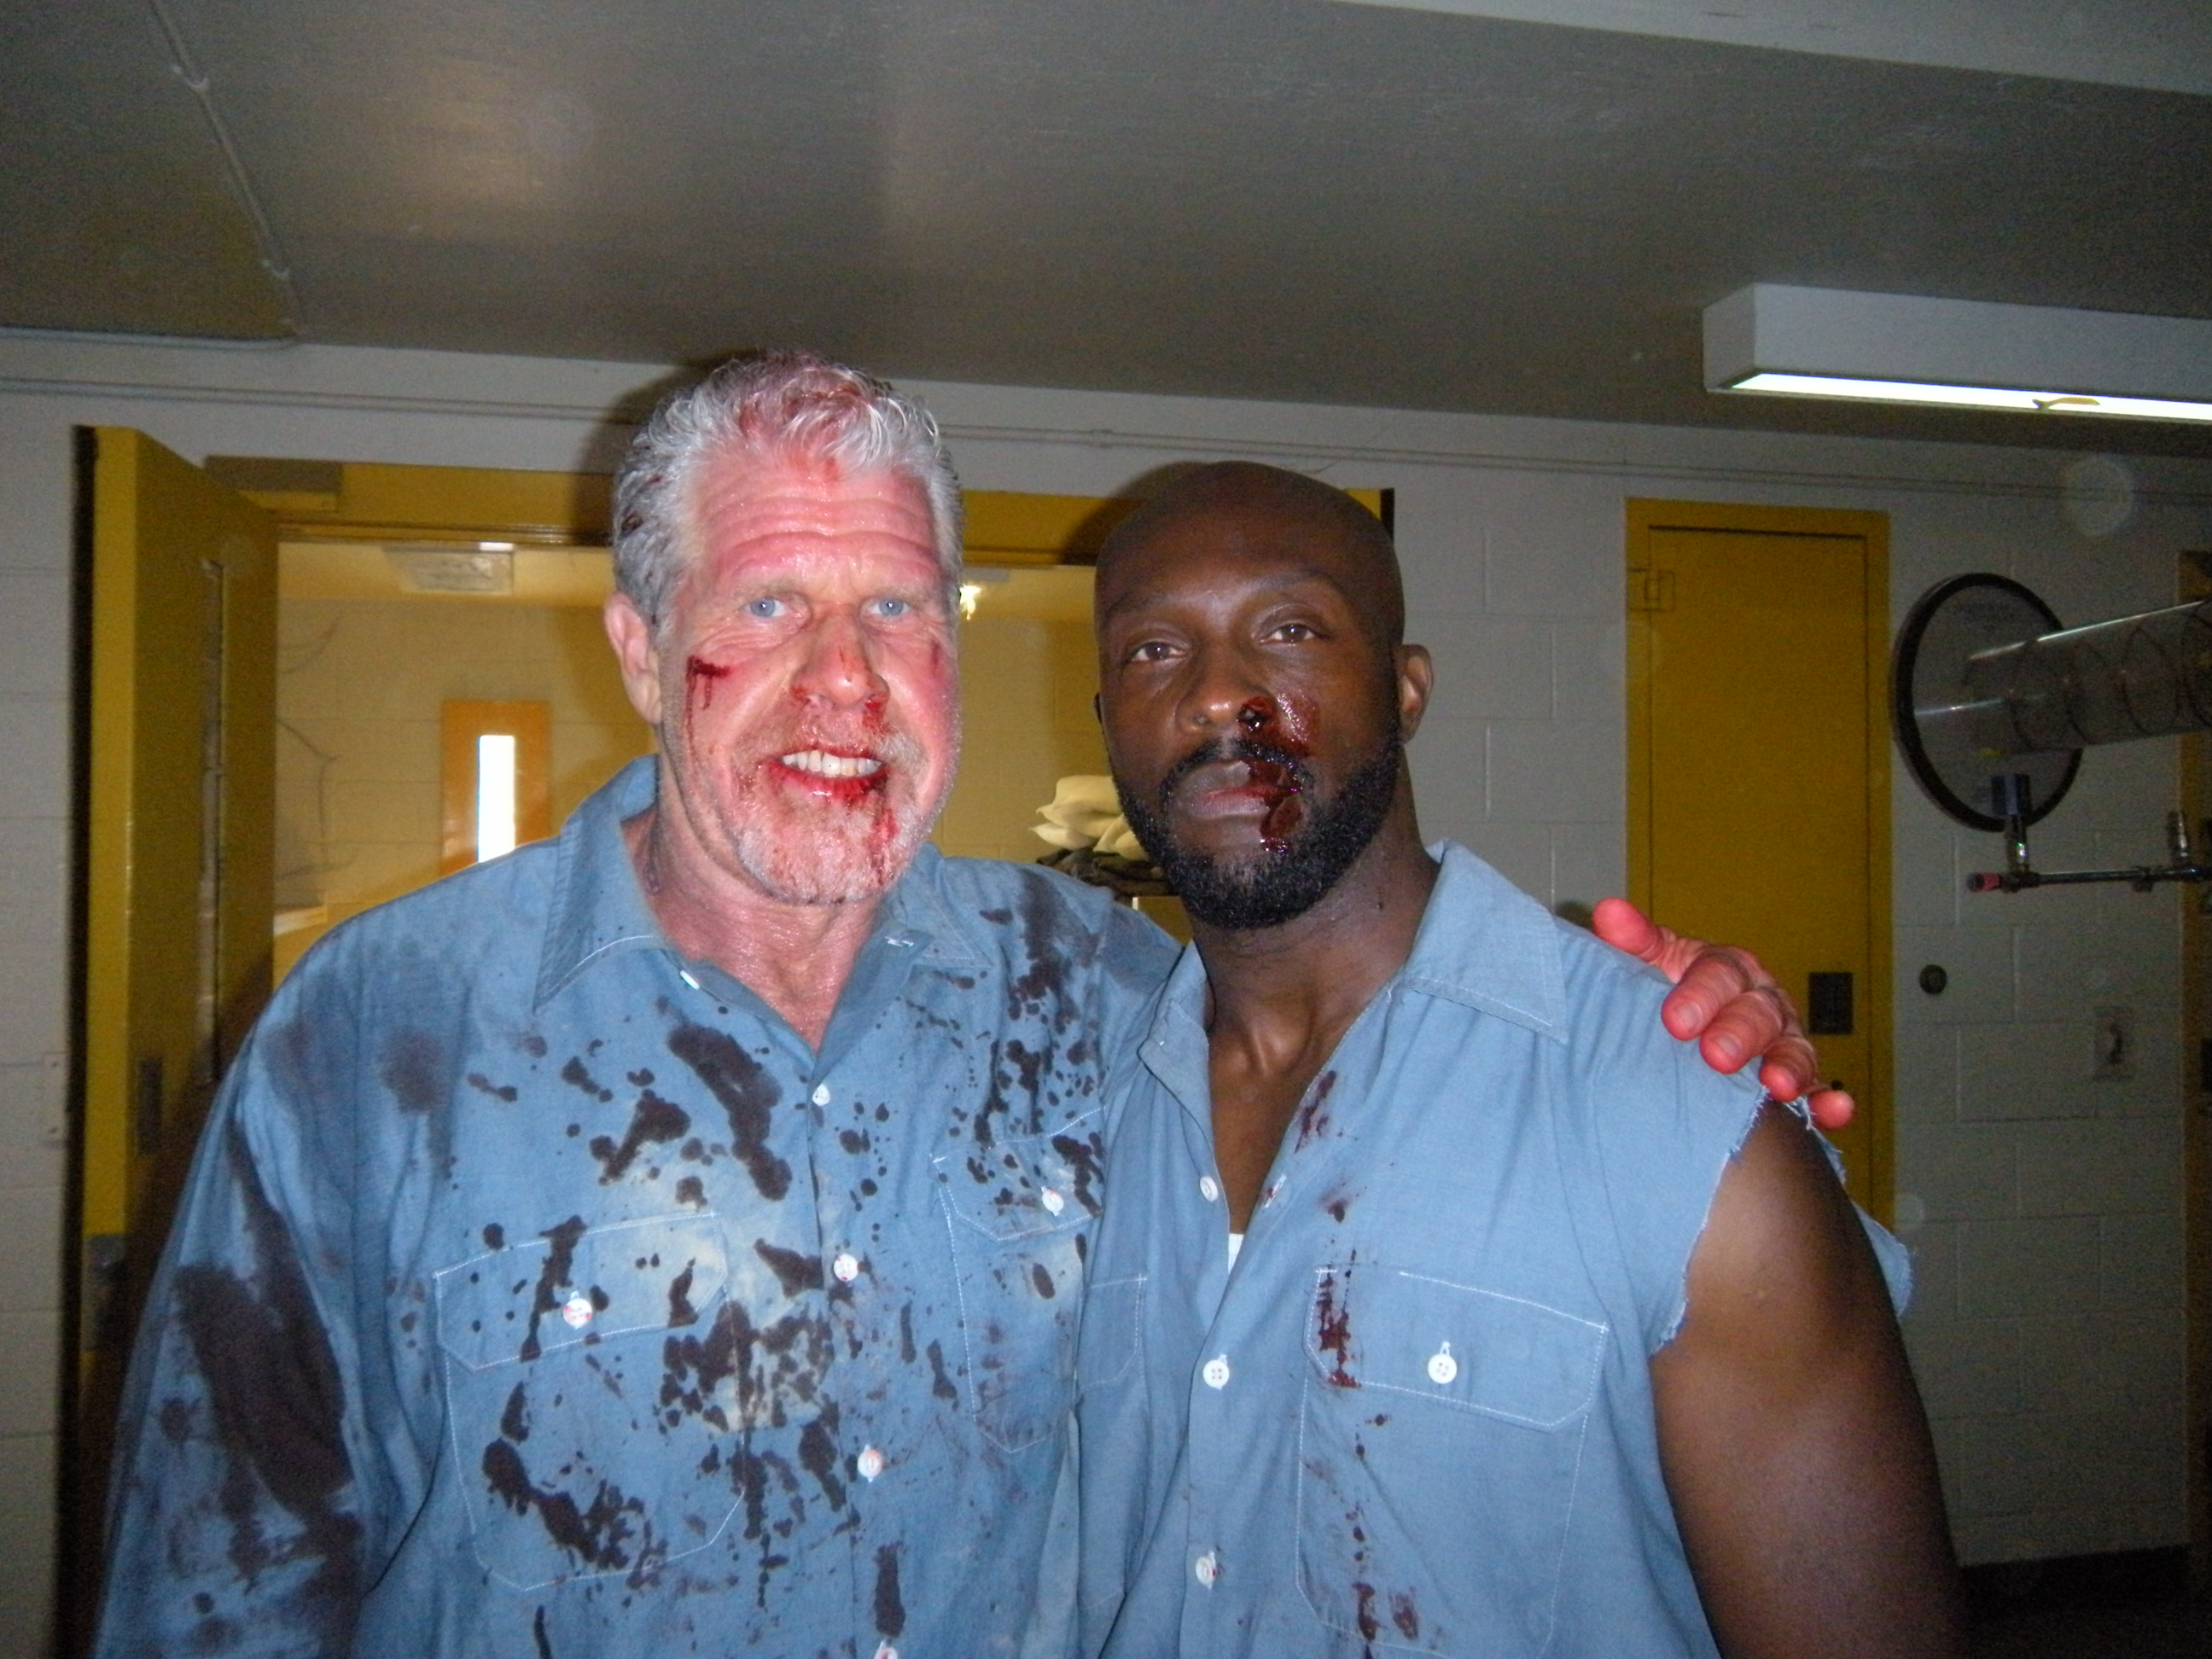 Ron Perlman (Clay) and Ro Brooks (Kettle) on set of FX's hit drama series Sons Of Anarchy.